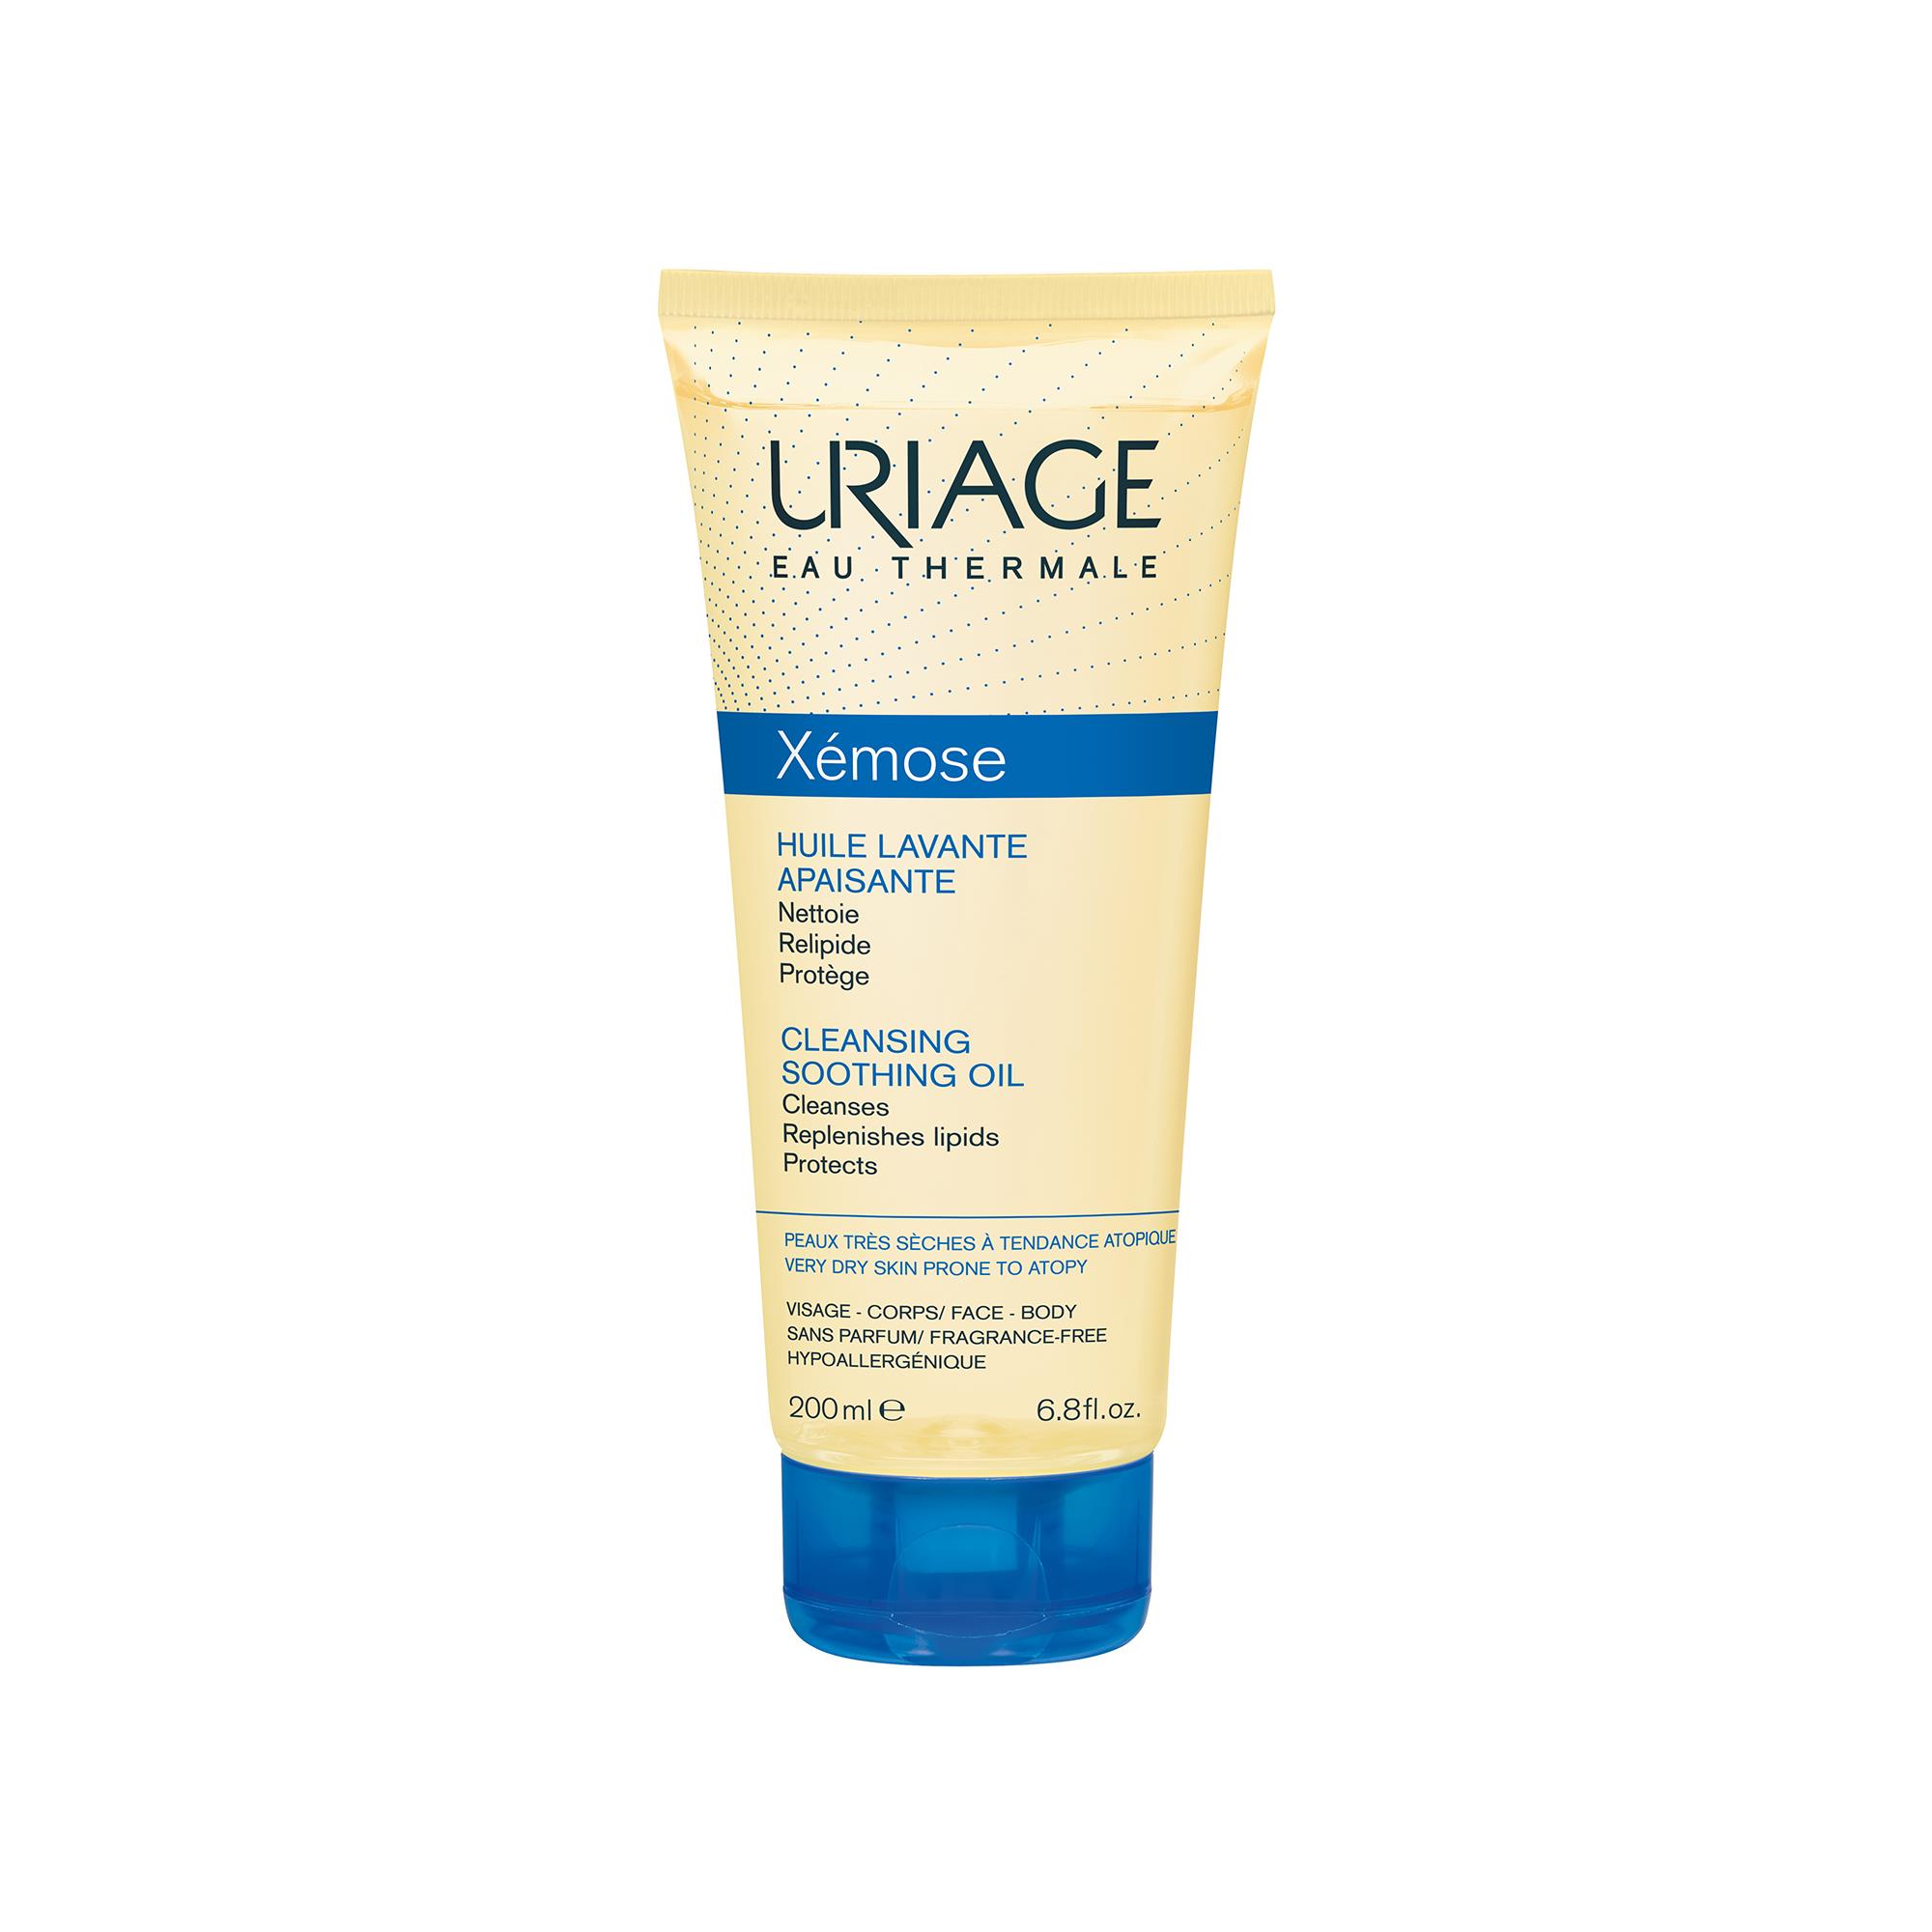 Uriage Xemose Cleansing Soothing Oil 200ml, 500ml - Face, Body